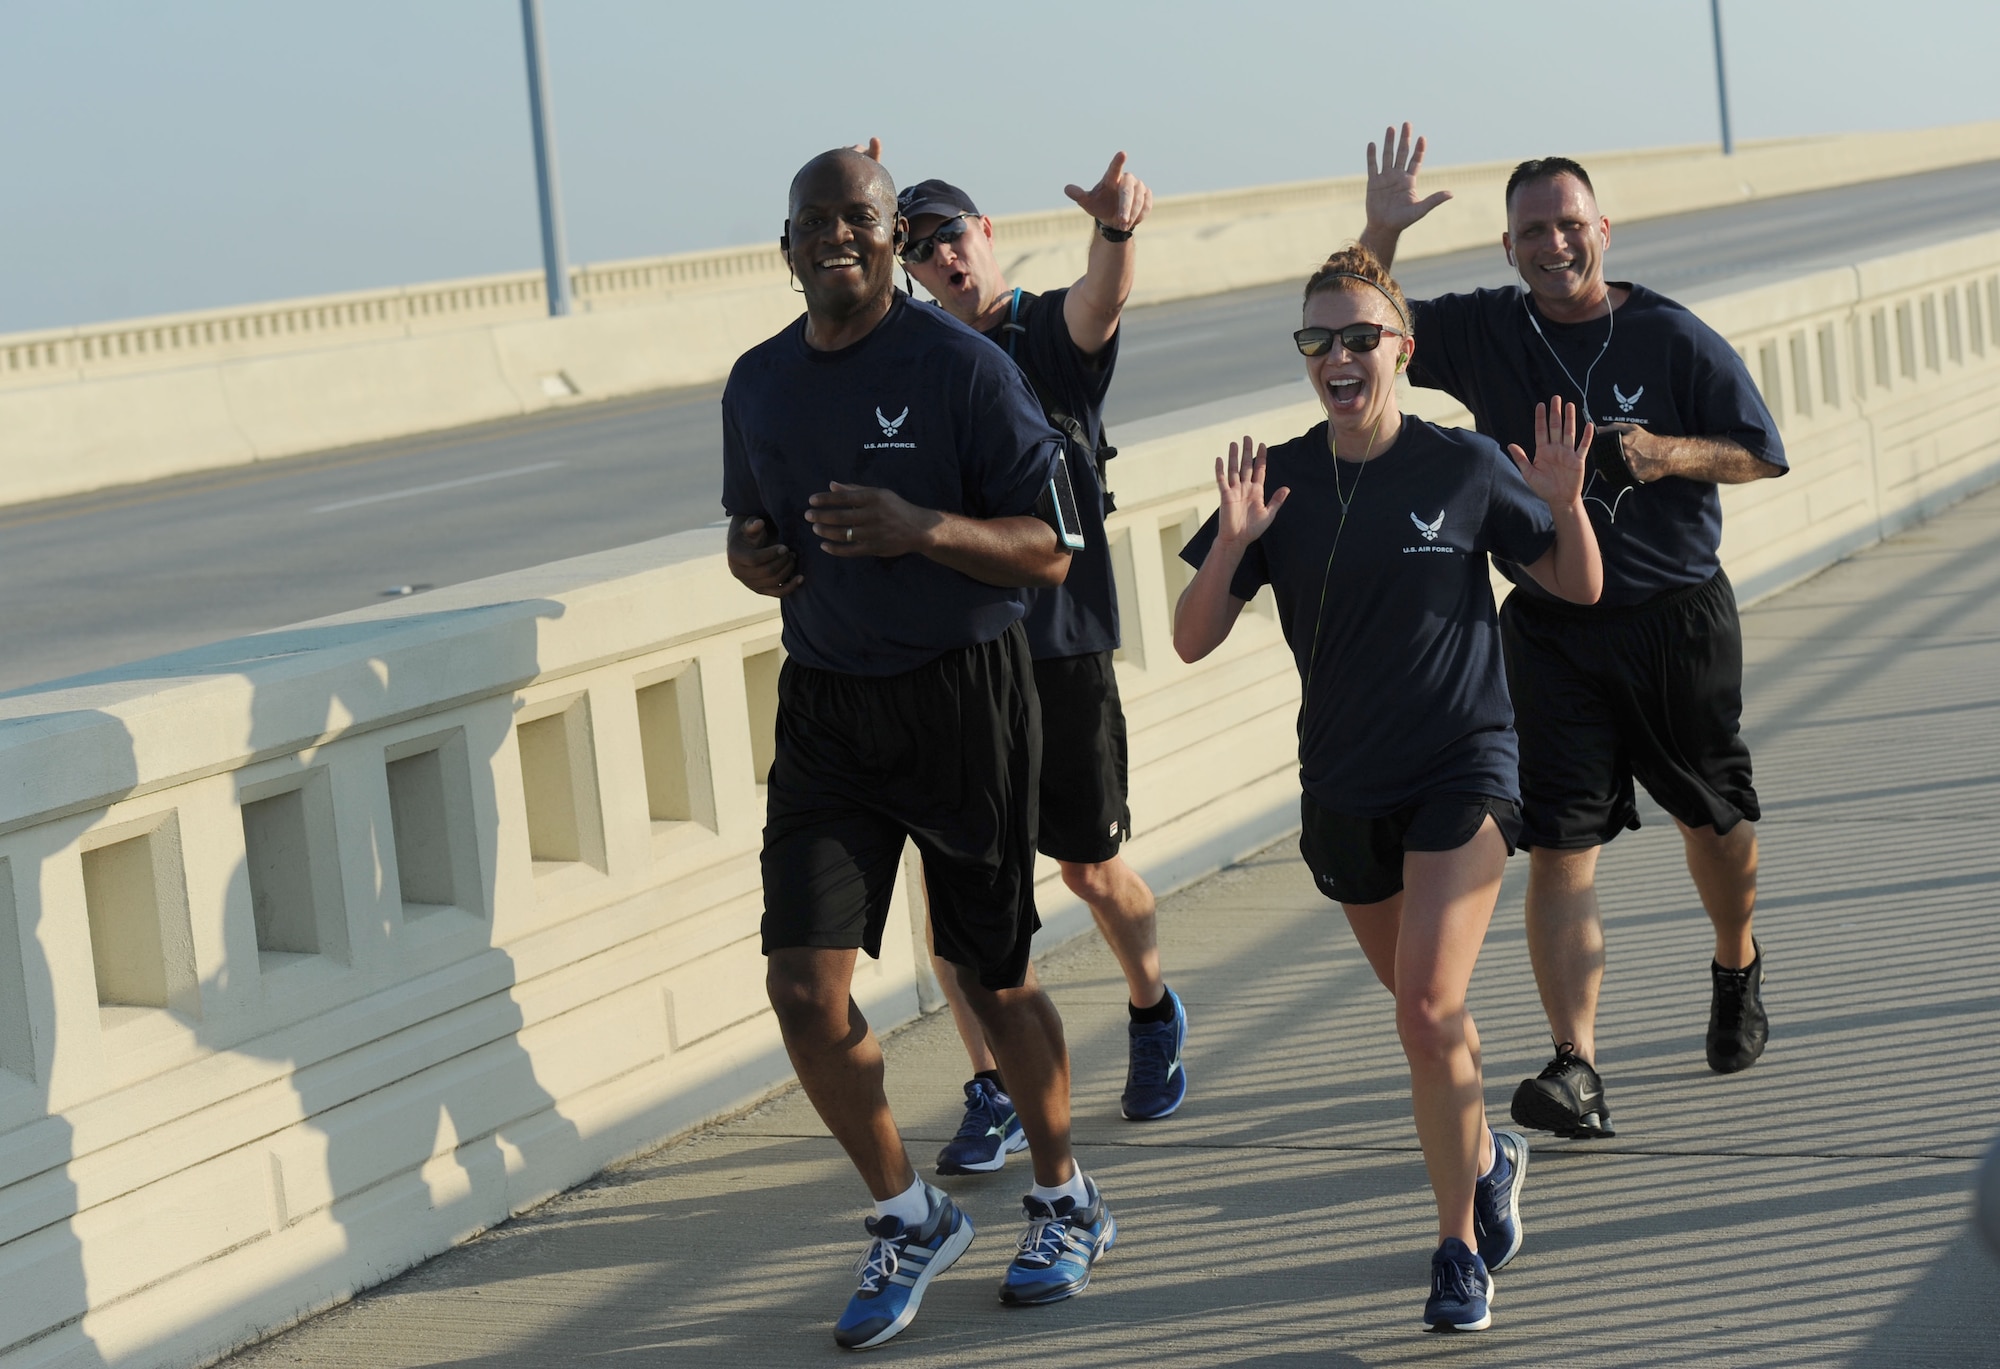 Leadership from the 81st Training Group participate in the Keesler Air Force Base Marine Detachment 3.7 mile remembrance run across the Ocean Springs/Biloxi Bridge Sept. 9, 2017, in Mississippi. The event honored those who lost their lives during the 9/11 attacks. (U.S. Air Force photo by Kemberly Groue)